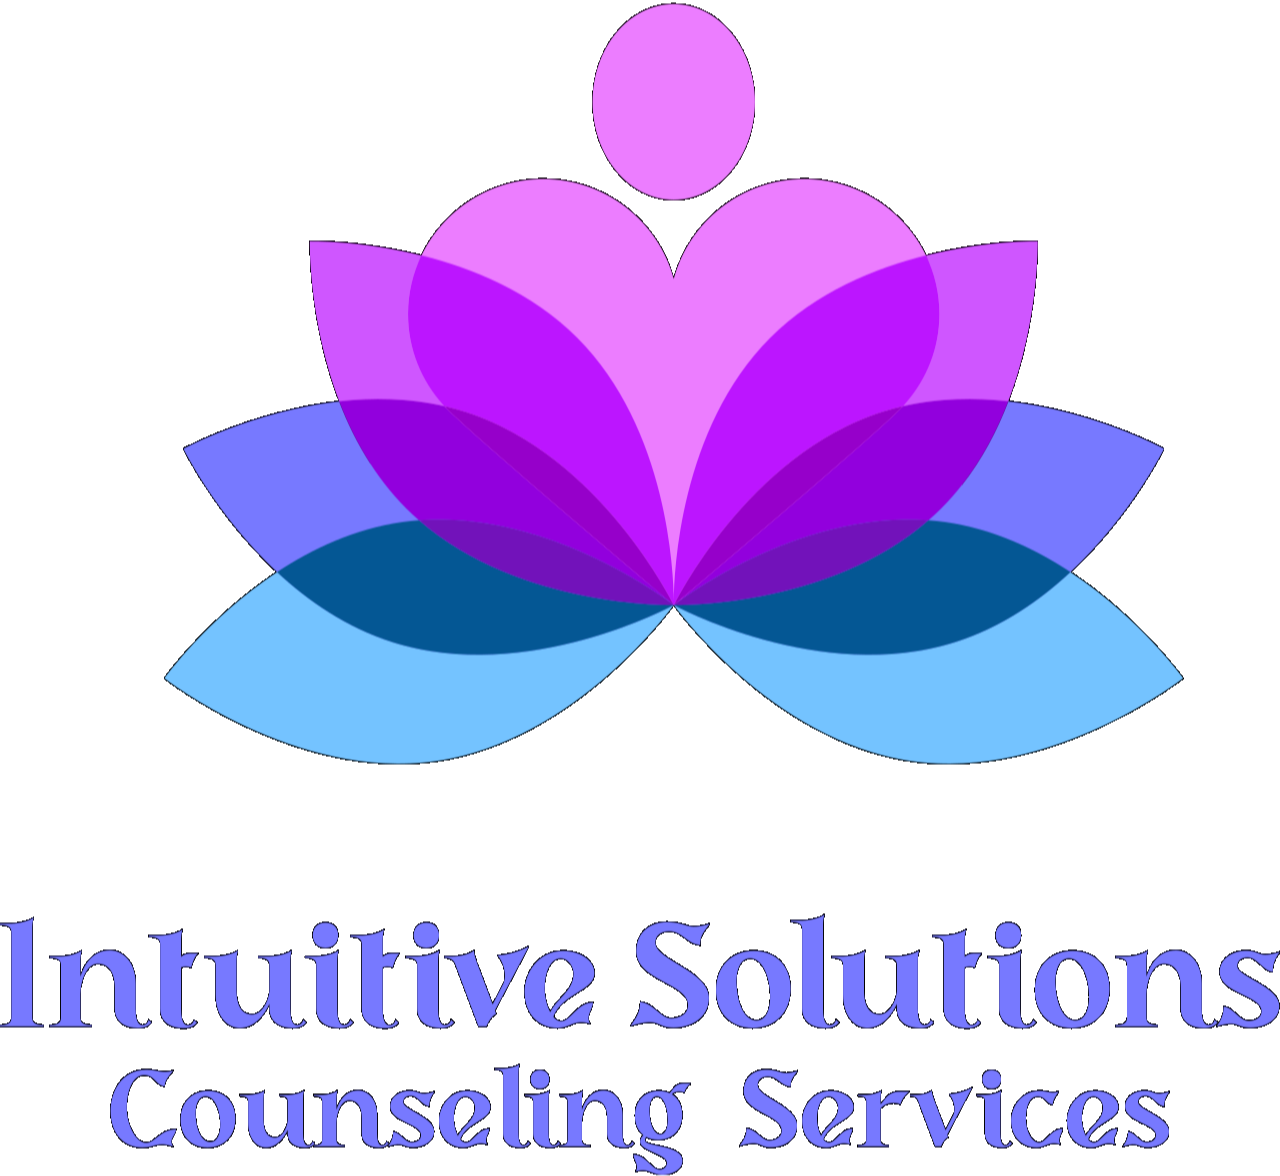 Intuitive Solutions Counseling Services's logo